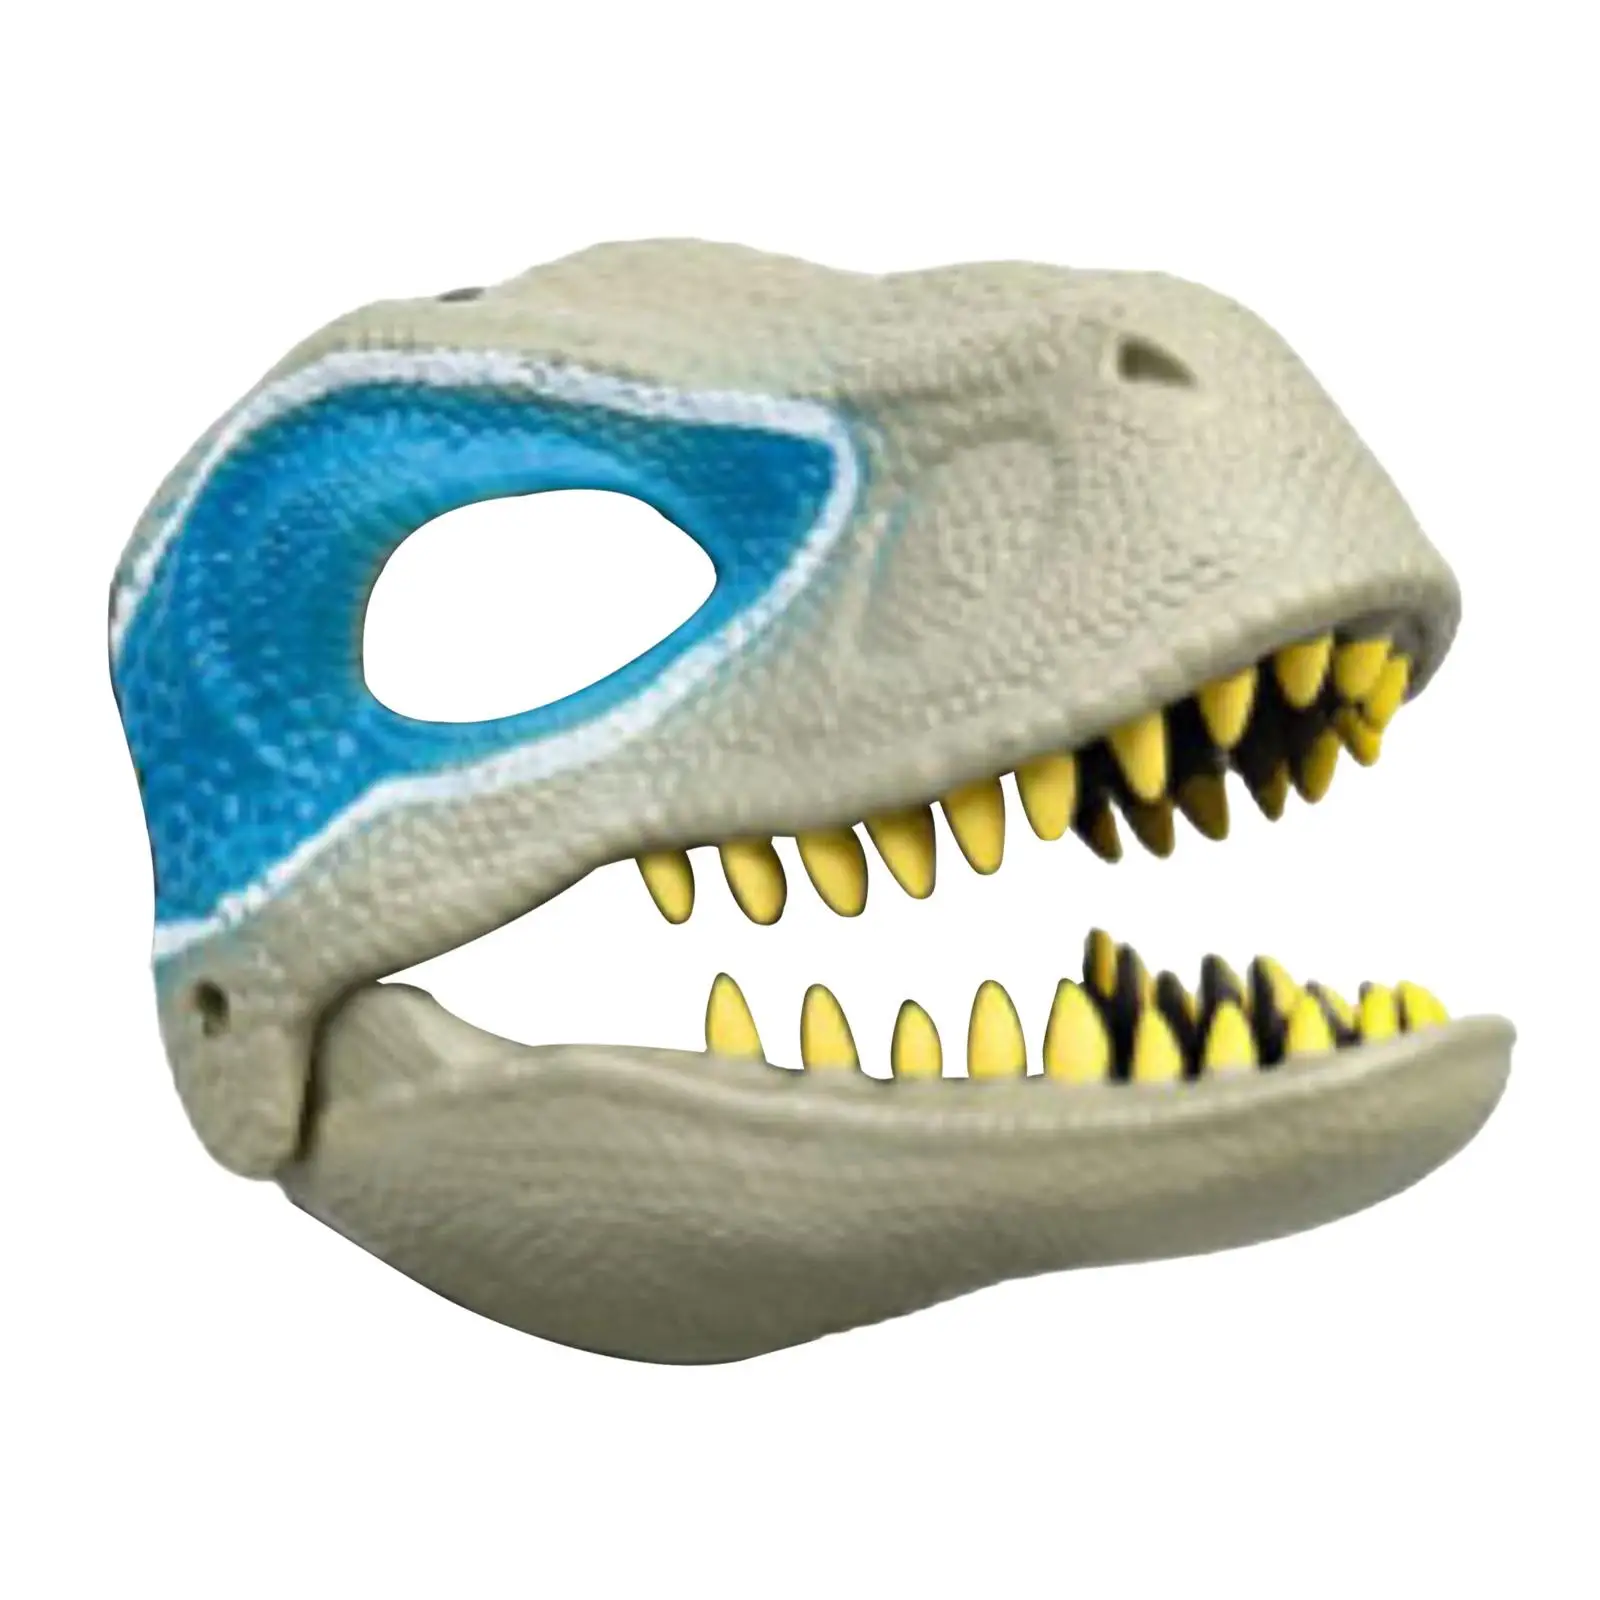 Dinosaur Mask Halloween Costume Novelty Latex Mask Photo Props for Themed Parties Festival Theater Fancy Dress Stage Performance